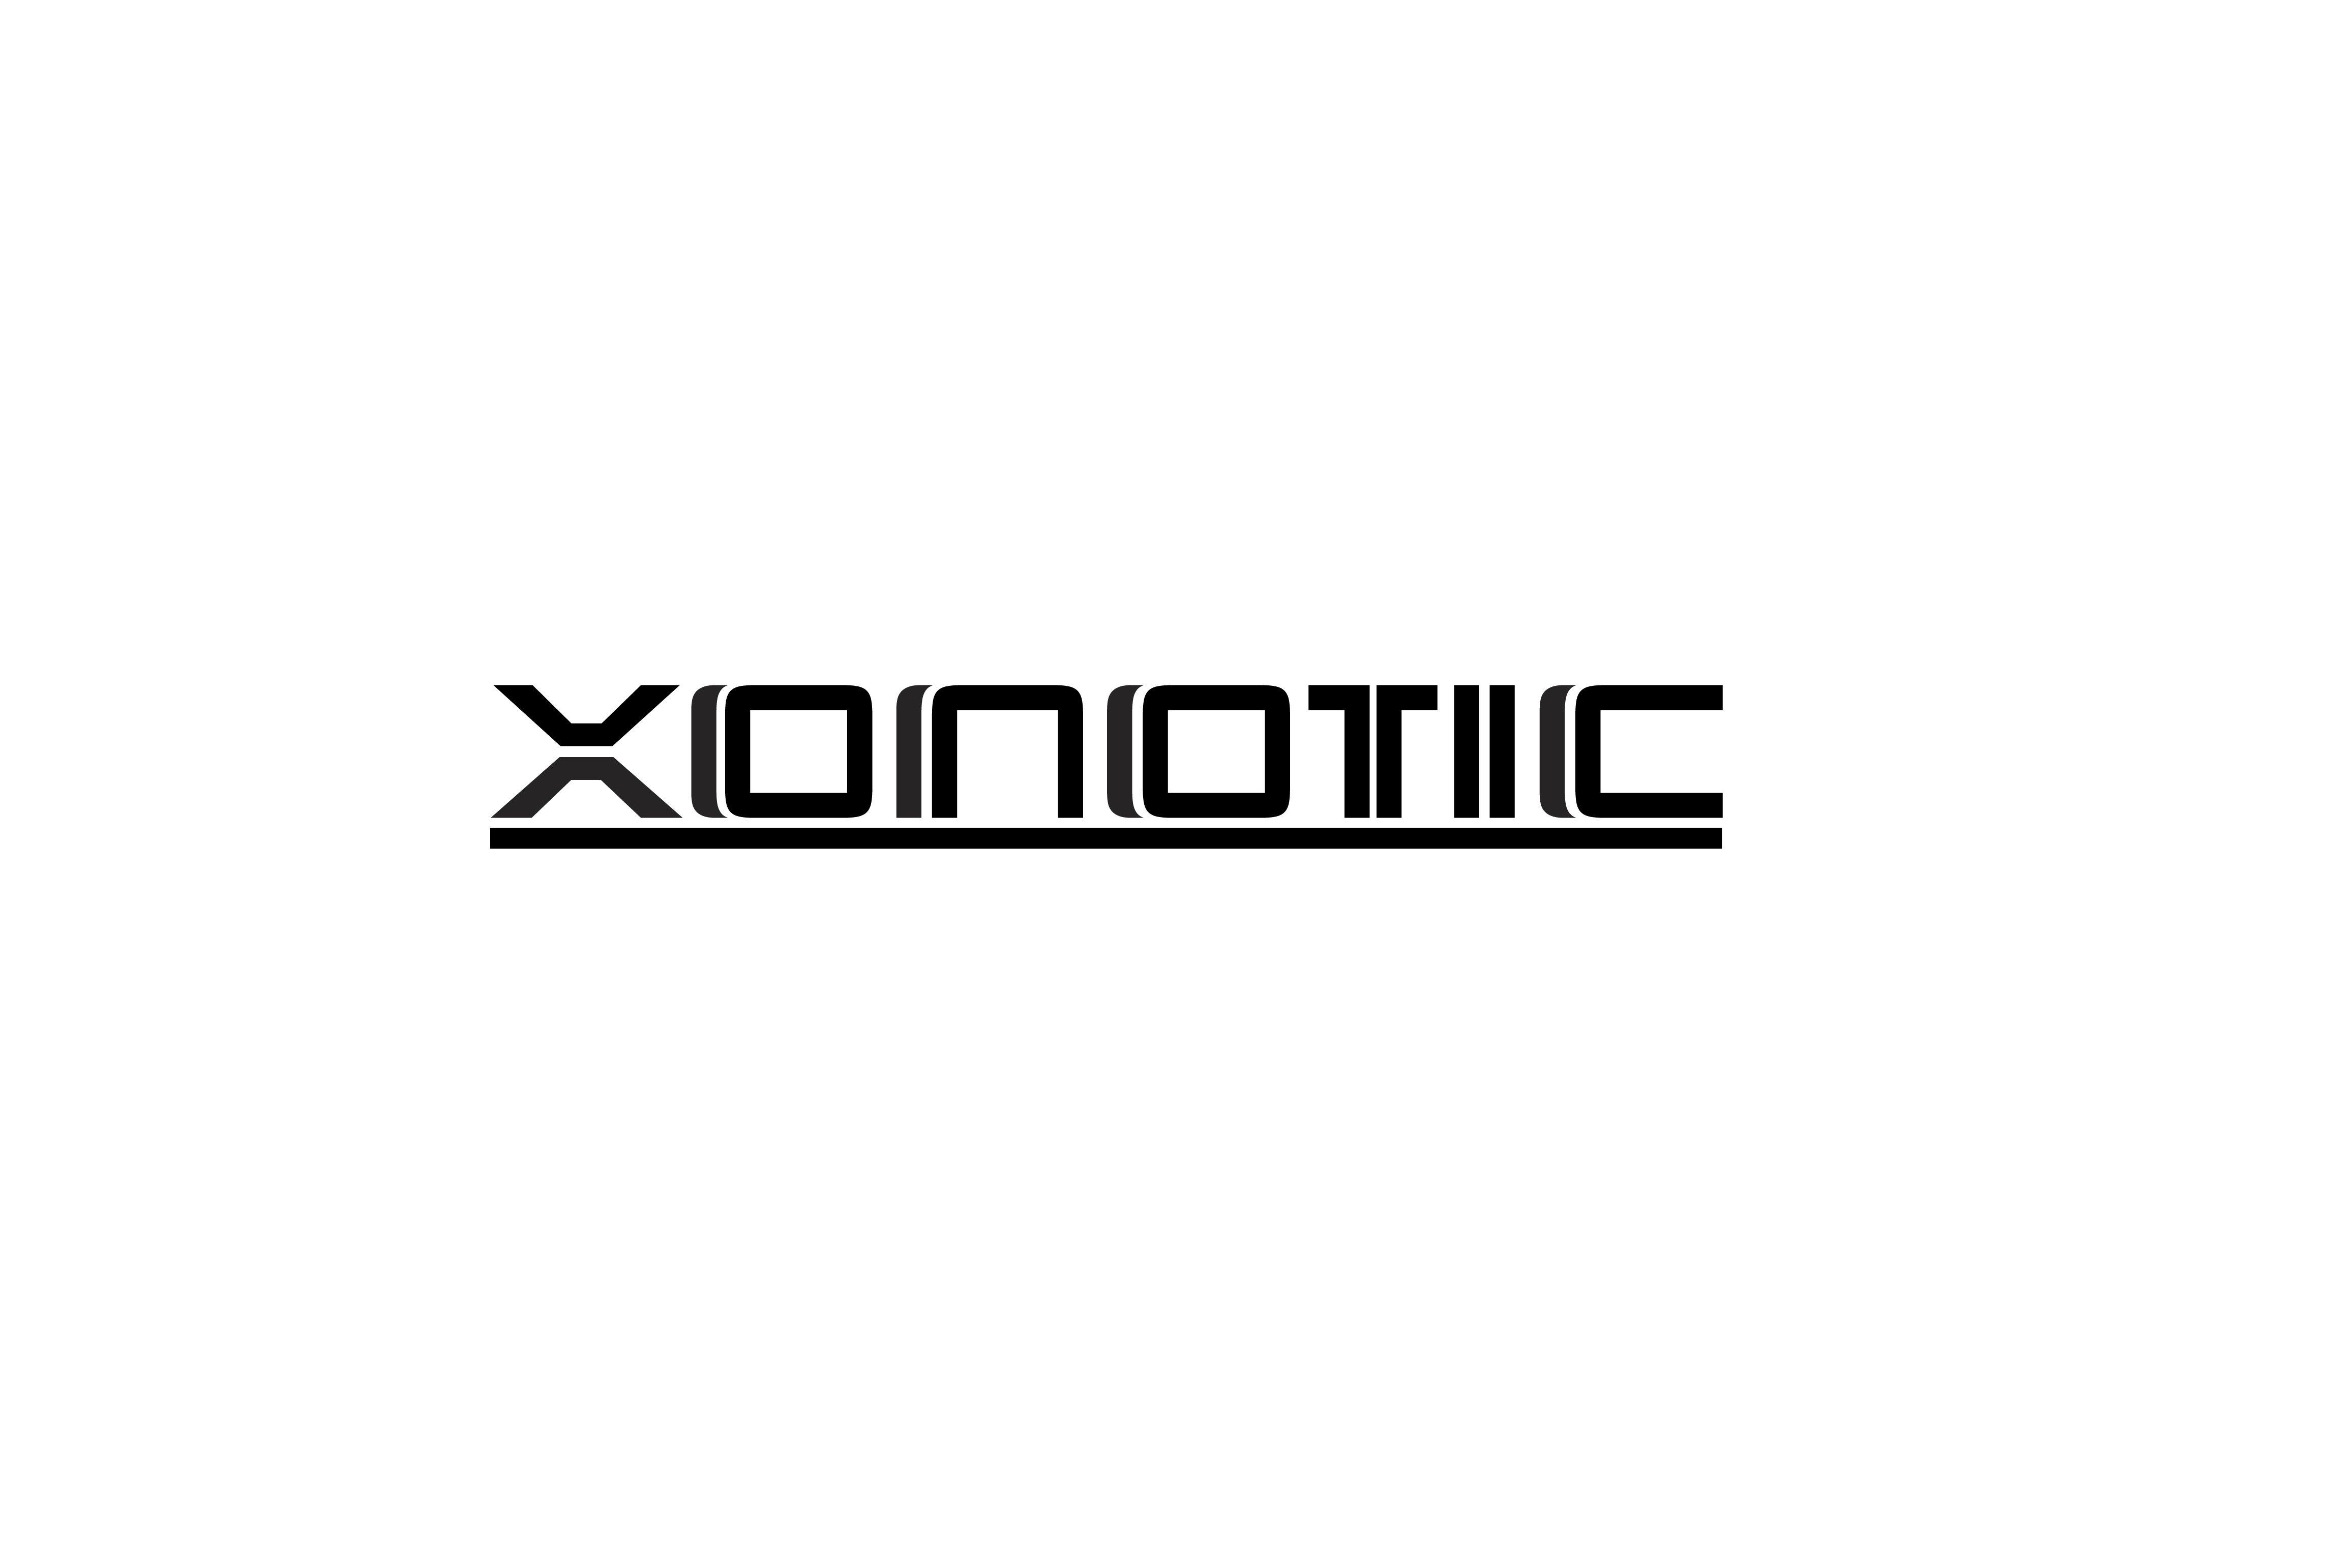 TGE Logo - A new logo for open source game XONOTIC